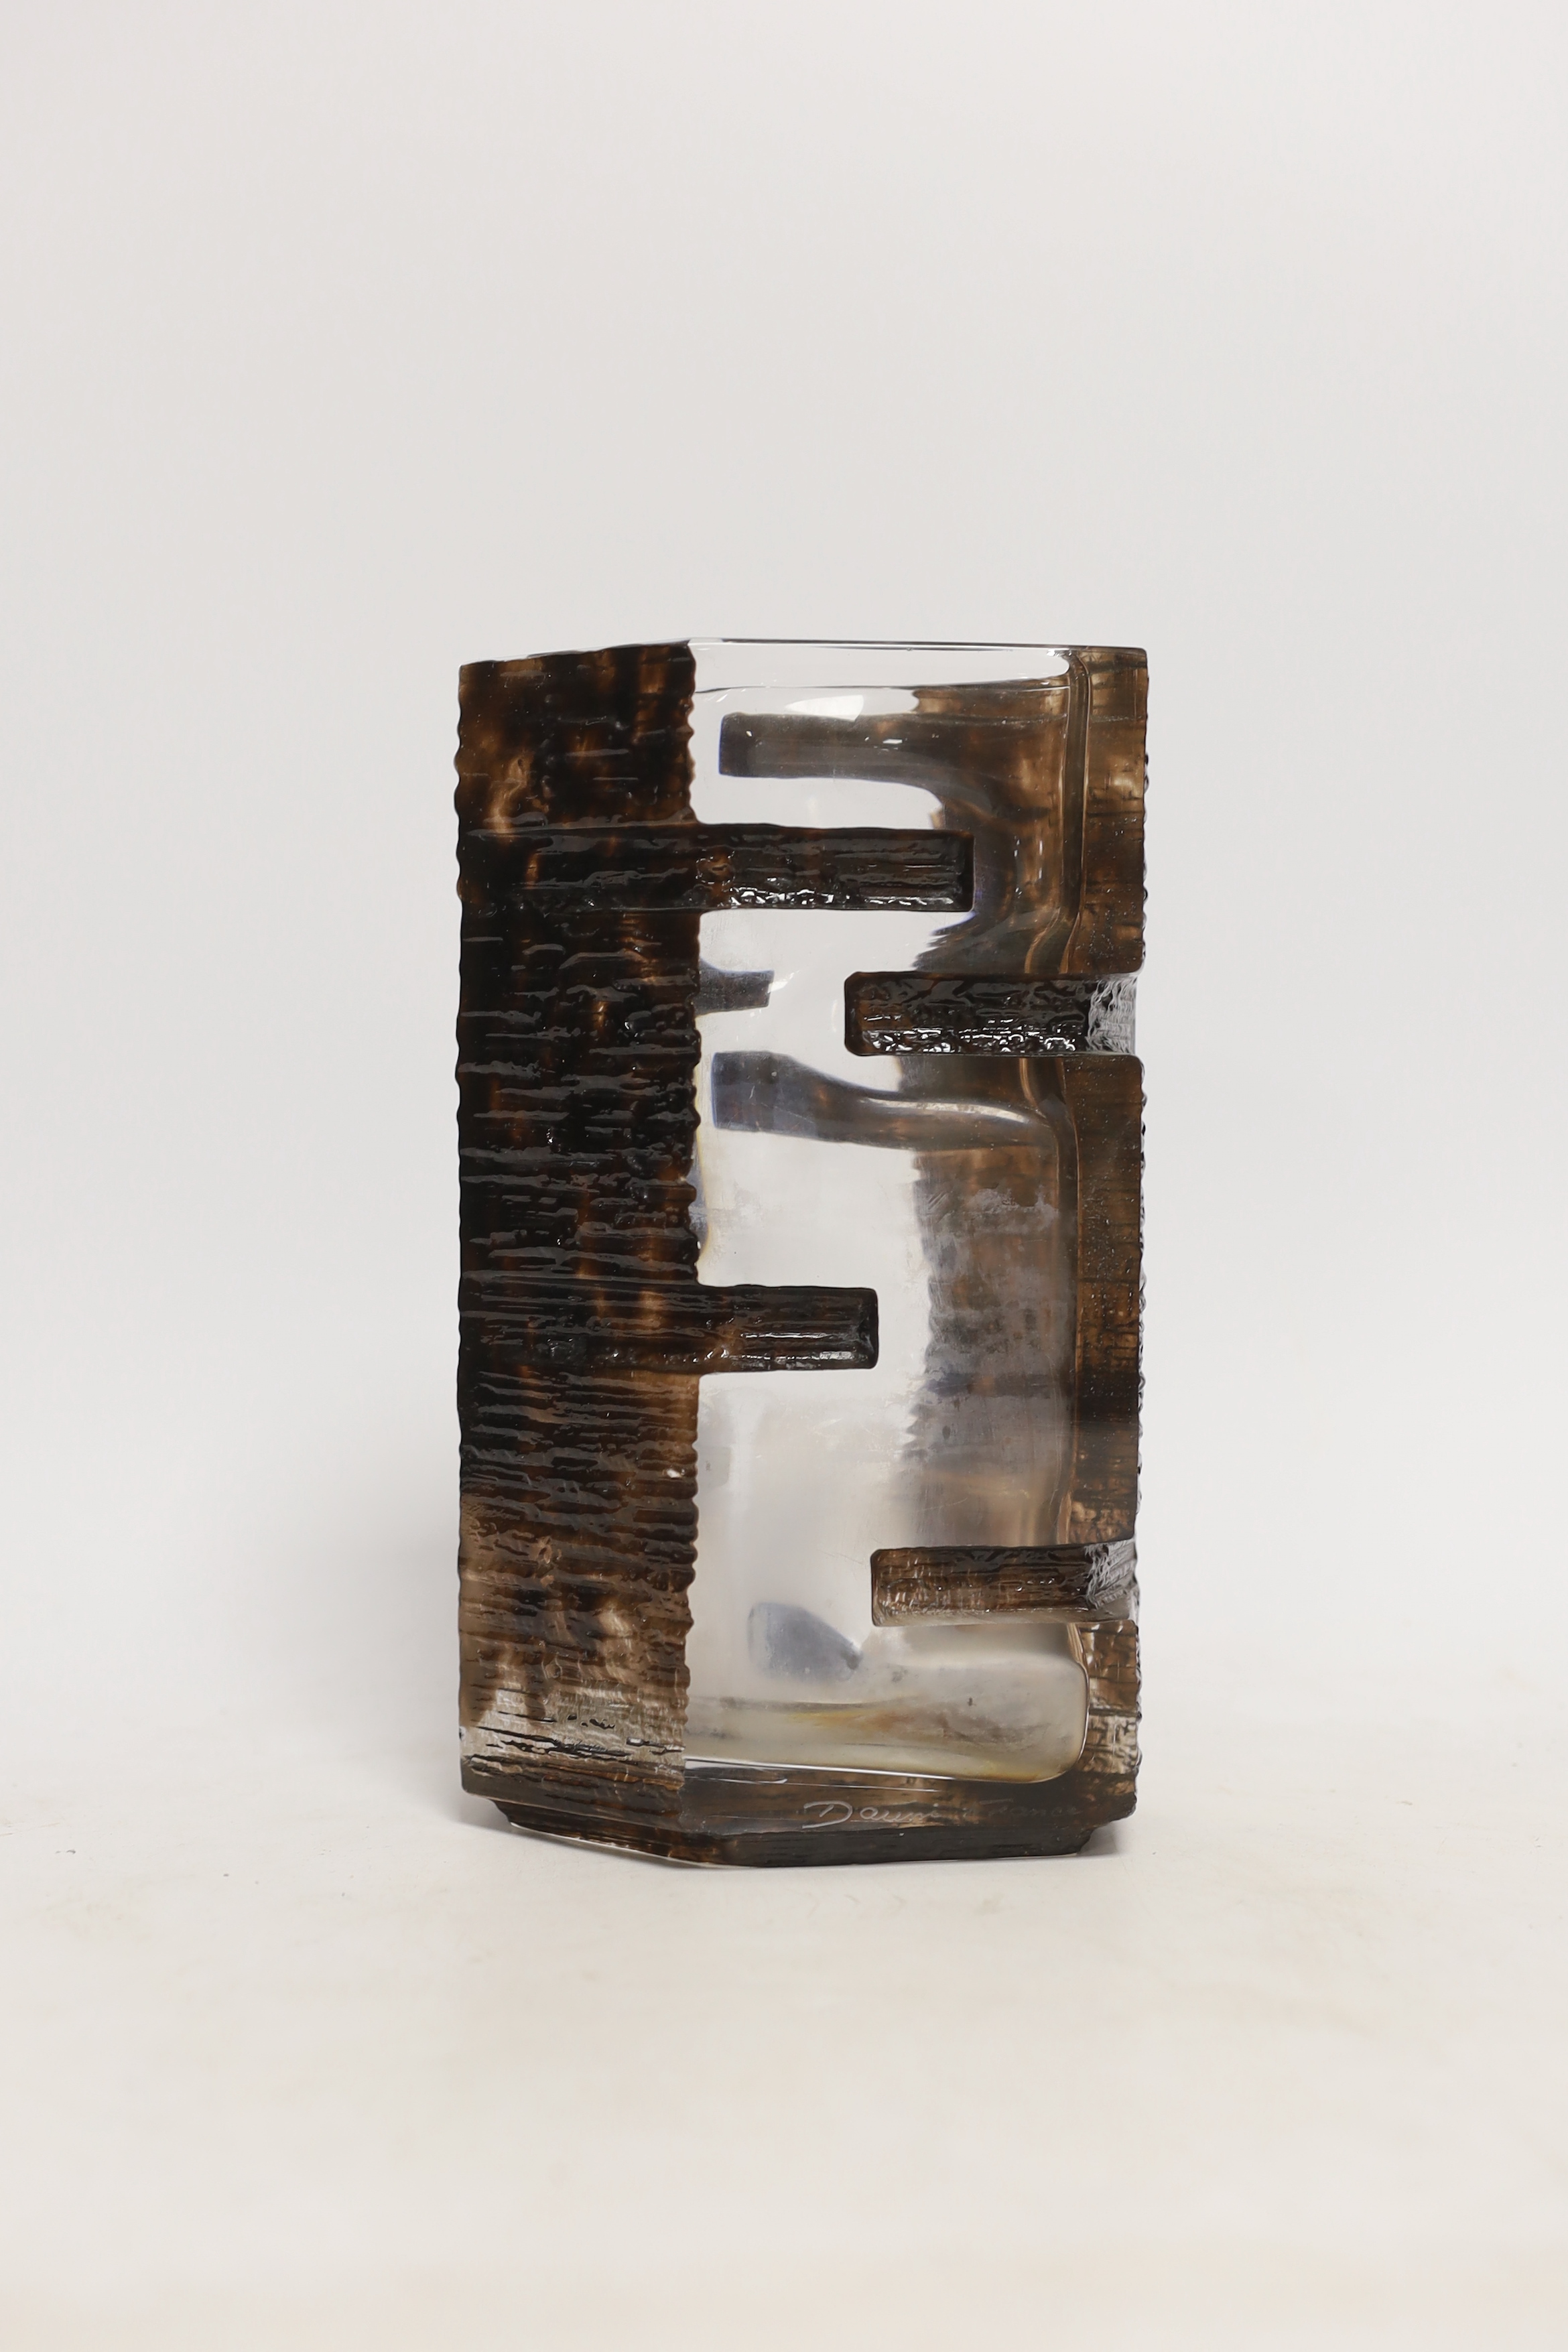 A brutalist style Daum glass vase by Cesar Baldaccini, with etched signature, Daum France, 22cm high